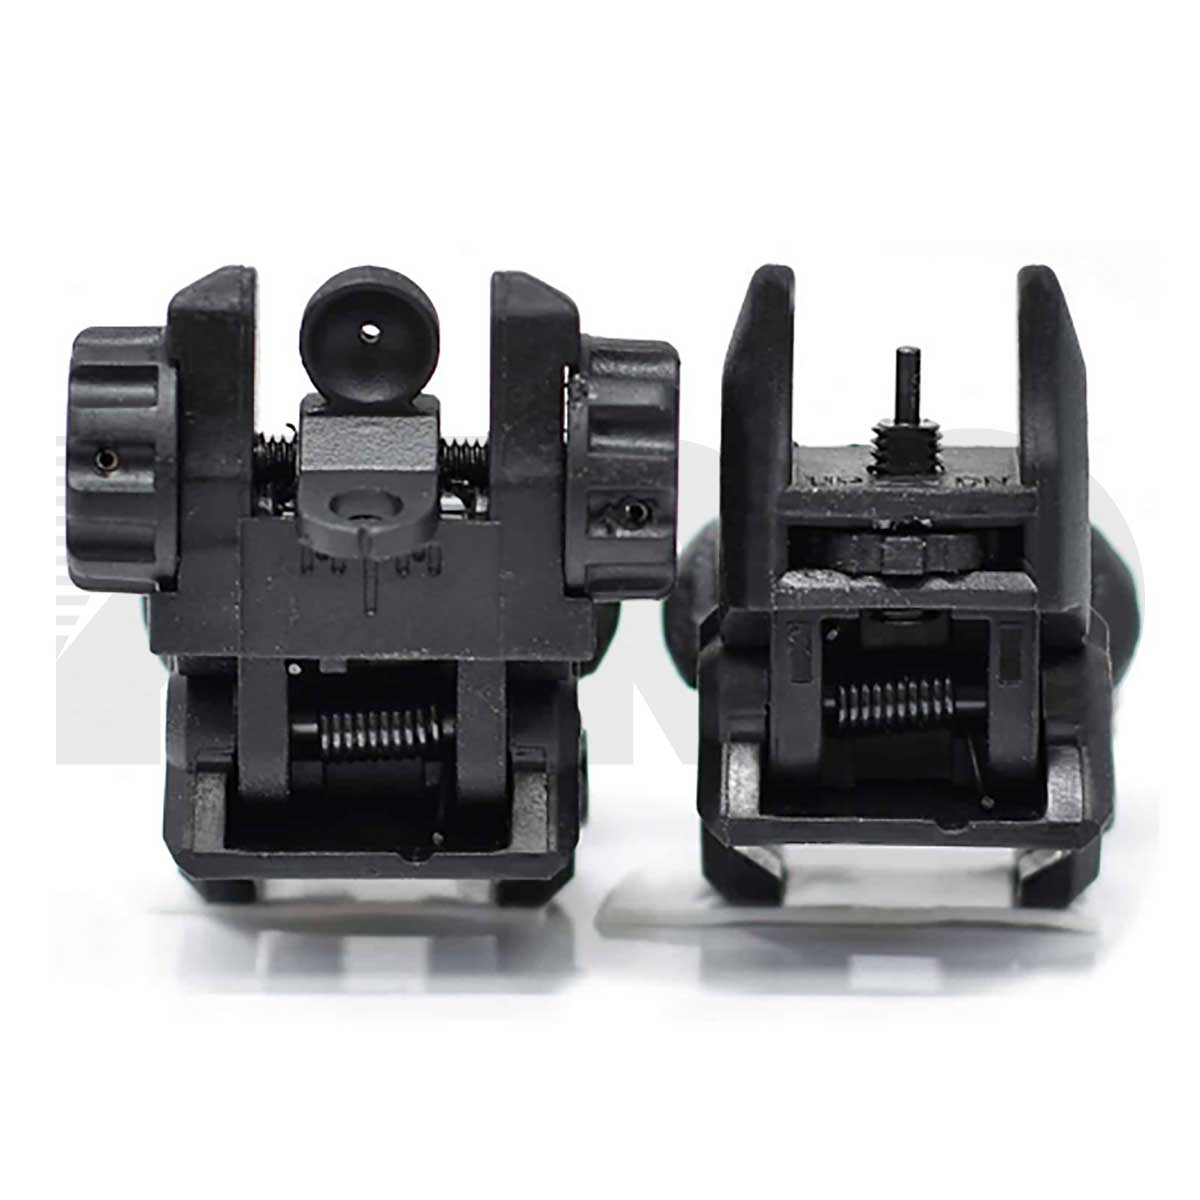 KIRO FLUS - Front and Rear Flip Up Sights Made of Strong Polymer Composite